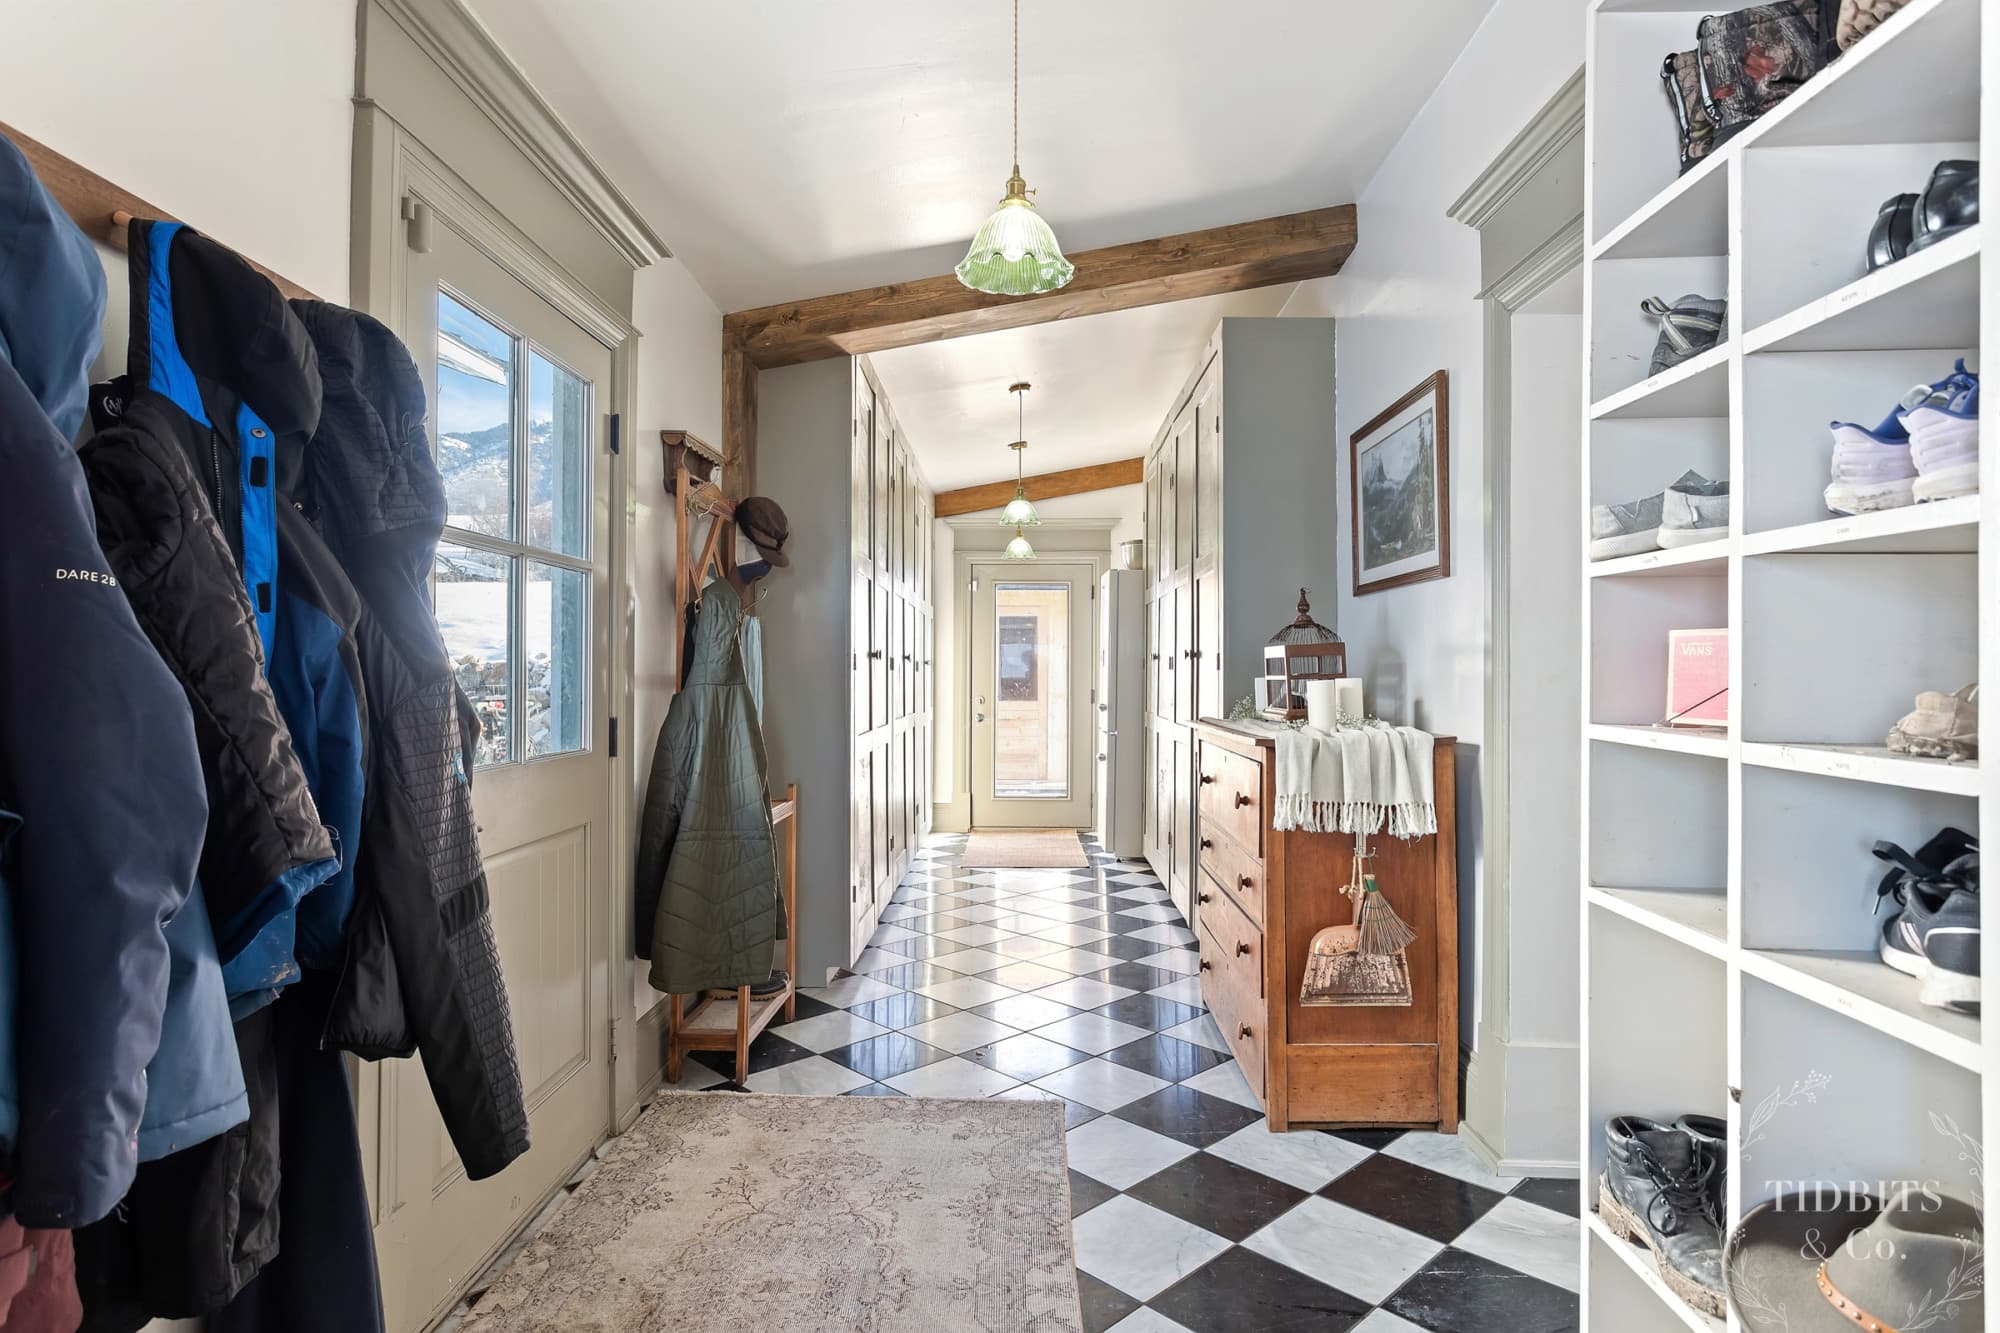 A mudroom in a pole barn house with tall cabinets